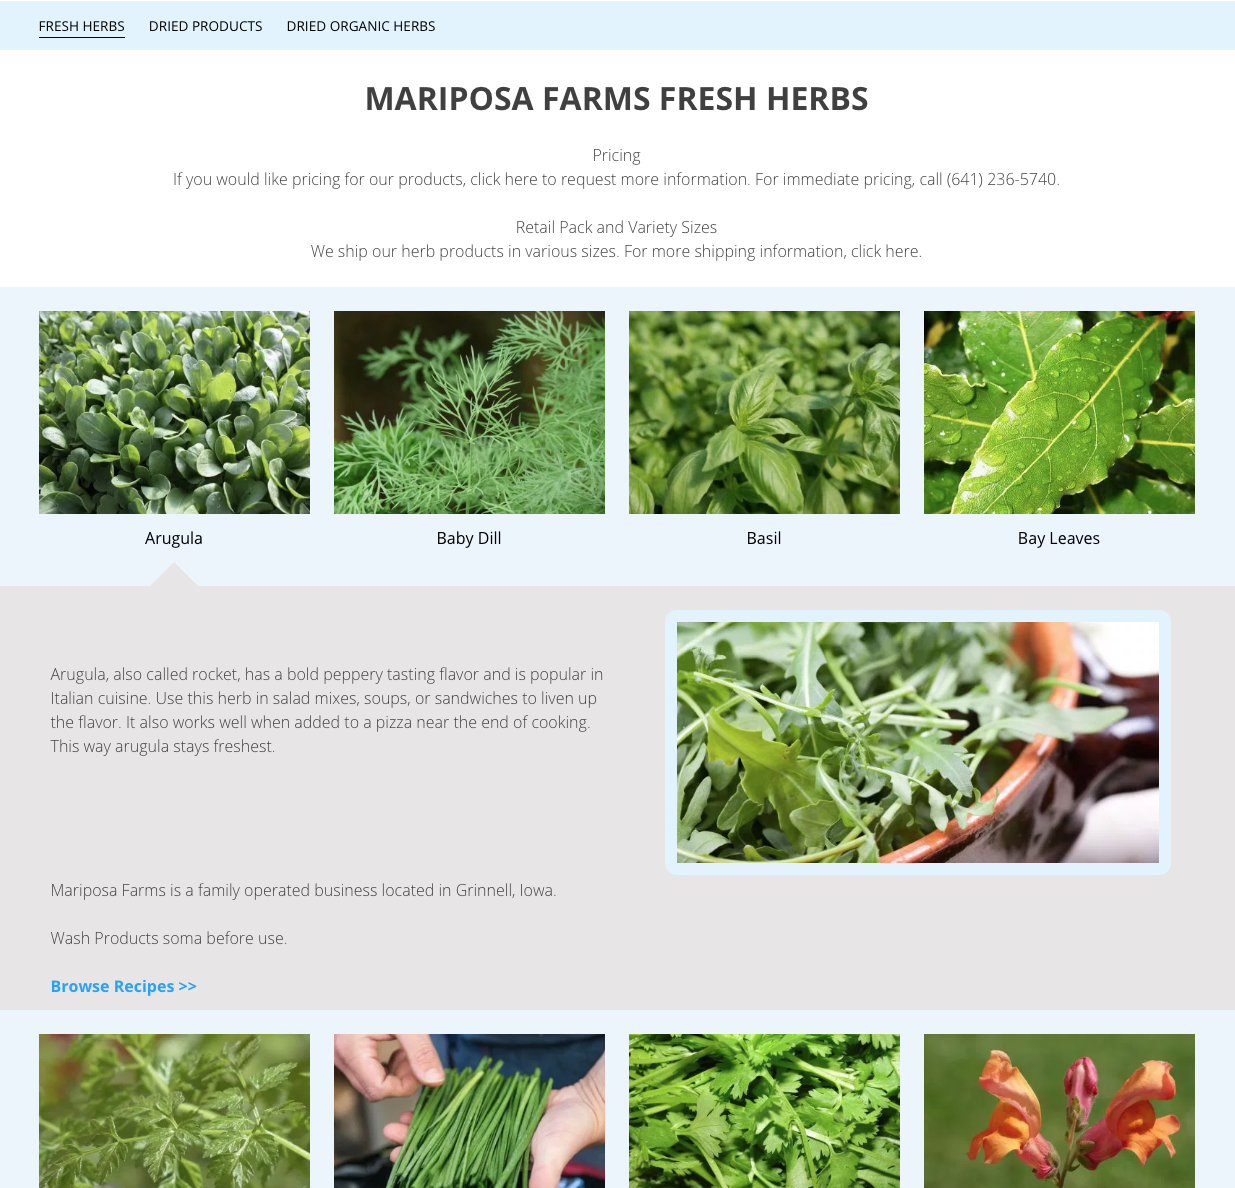 Mariposa Products